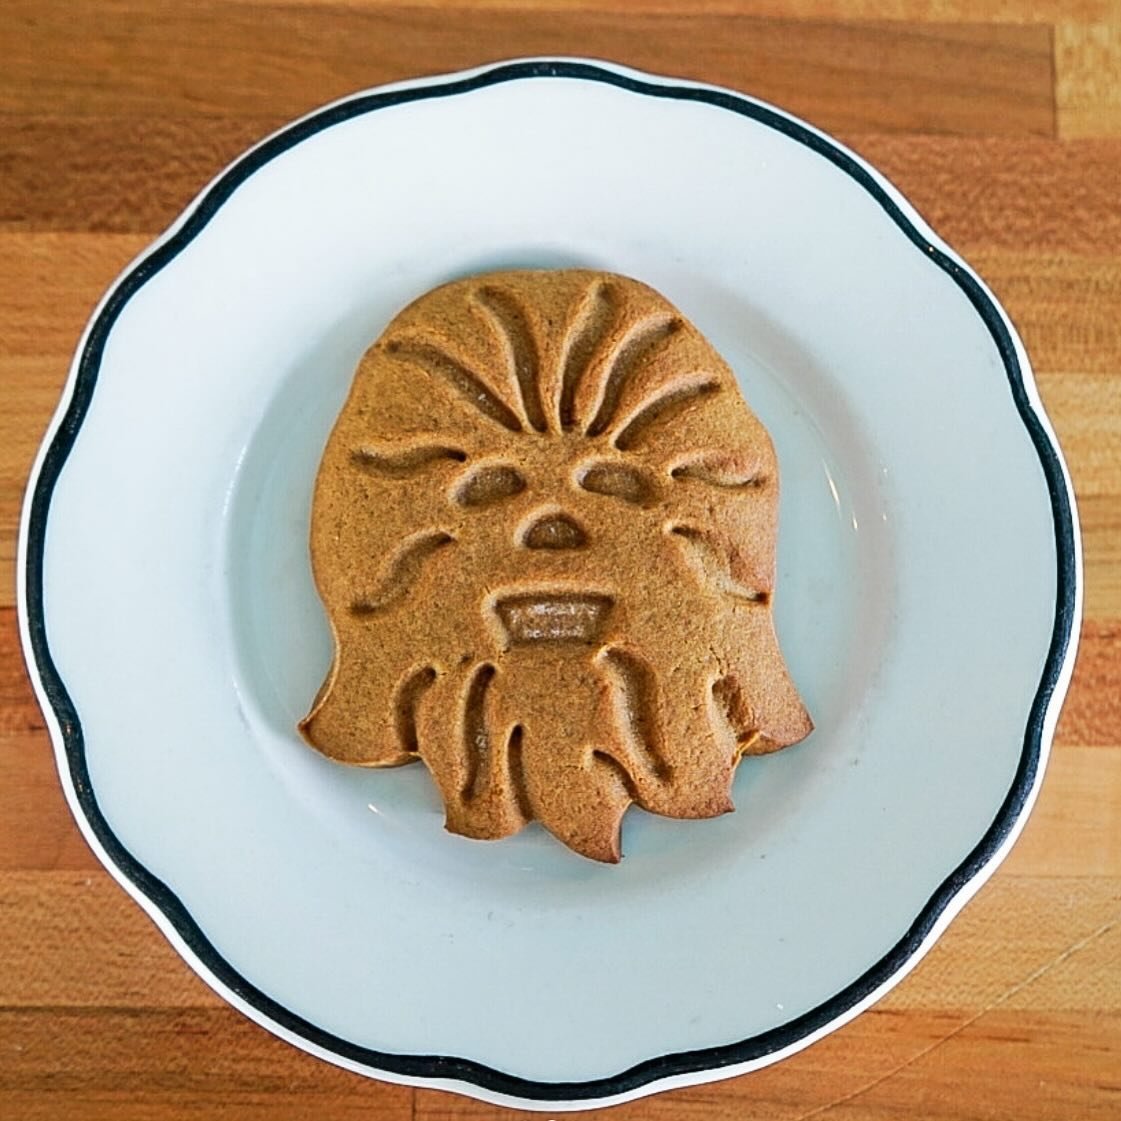 May the Fourth be with you! Come get one of our delicious Star Wars cookies while they last! These tender marranito-style treats are out of this world. 💫 🍪 👽 🌏